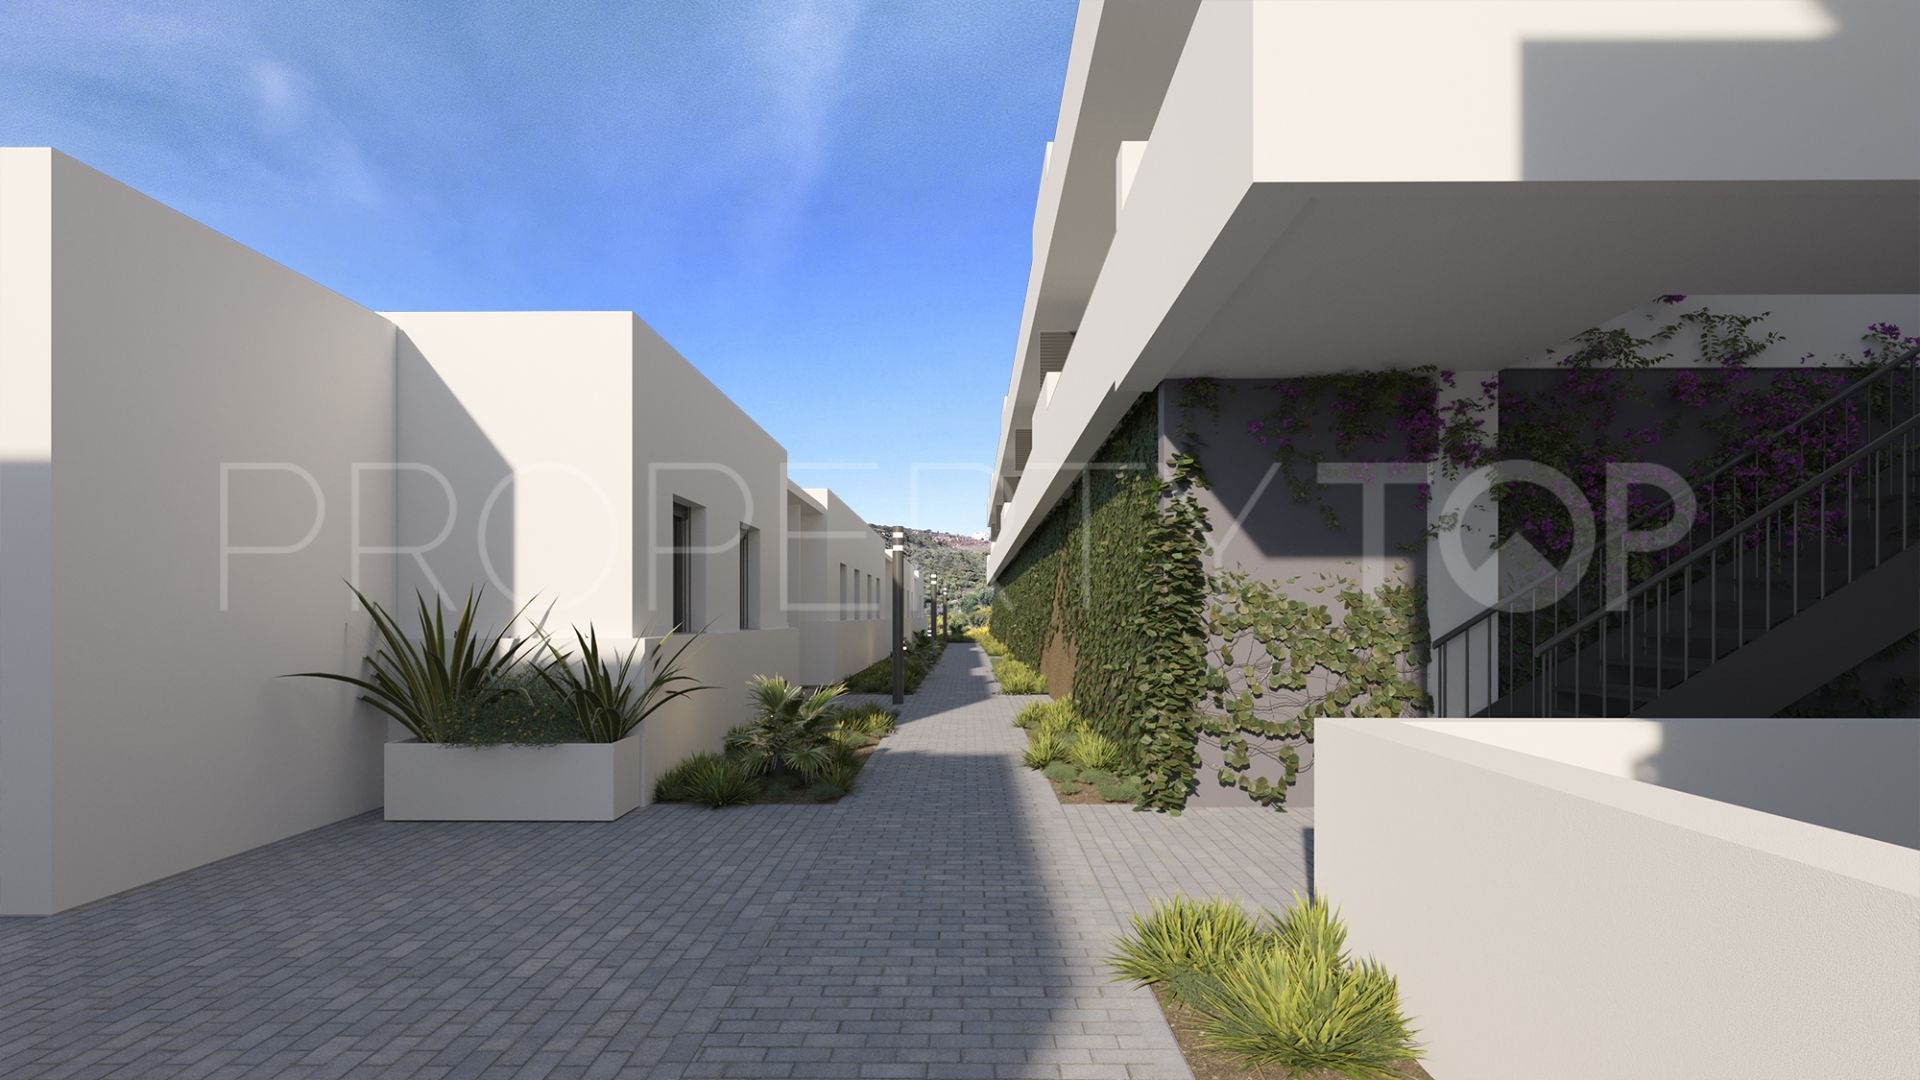 For sale town house in Manilva with 3 bedrooms